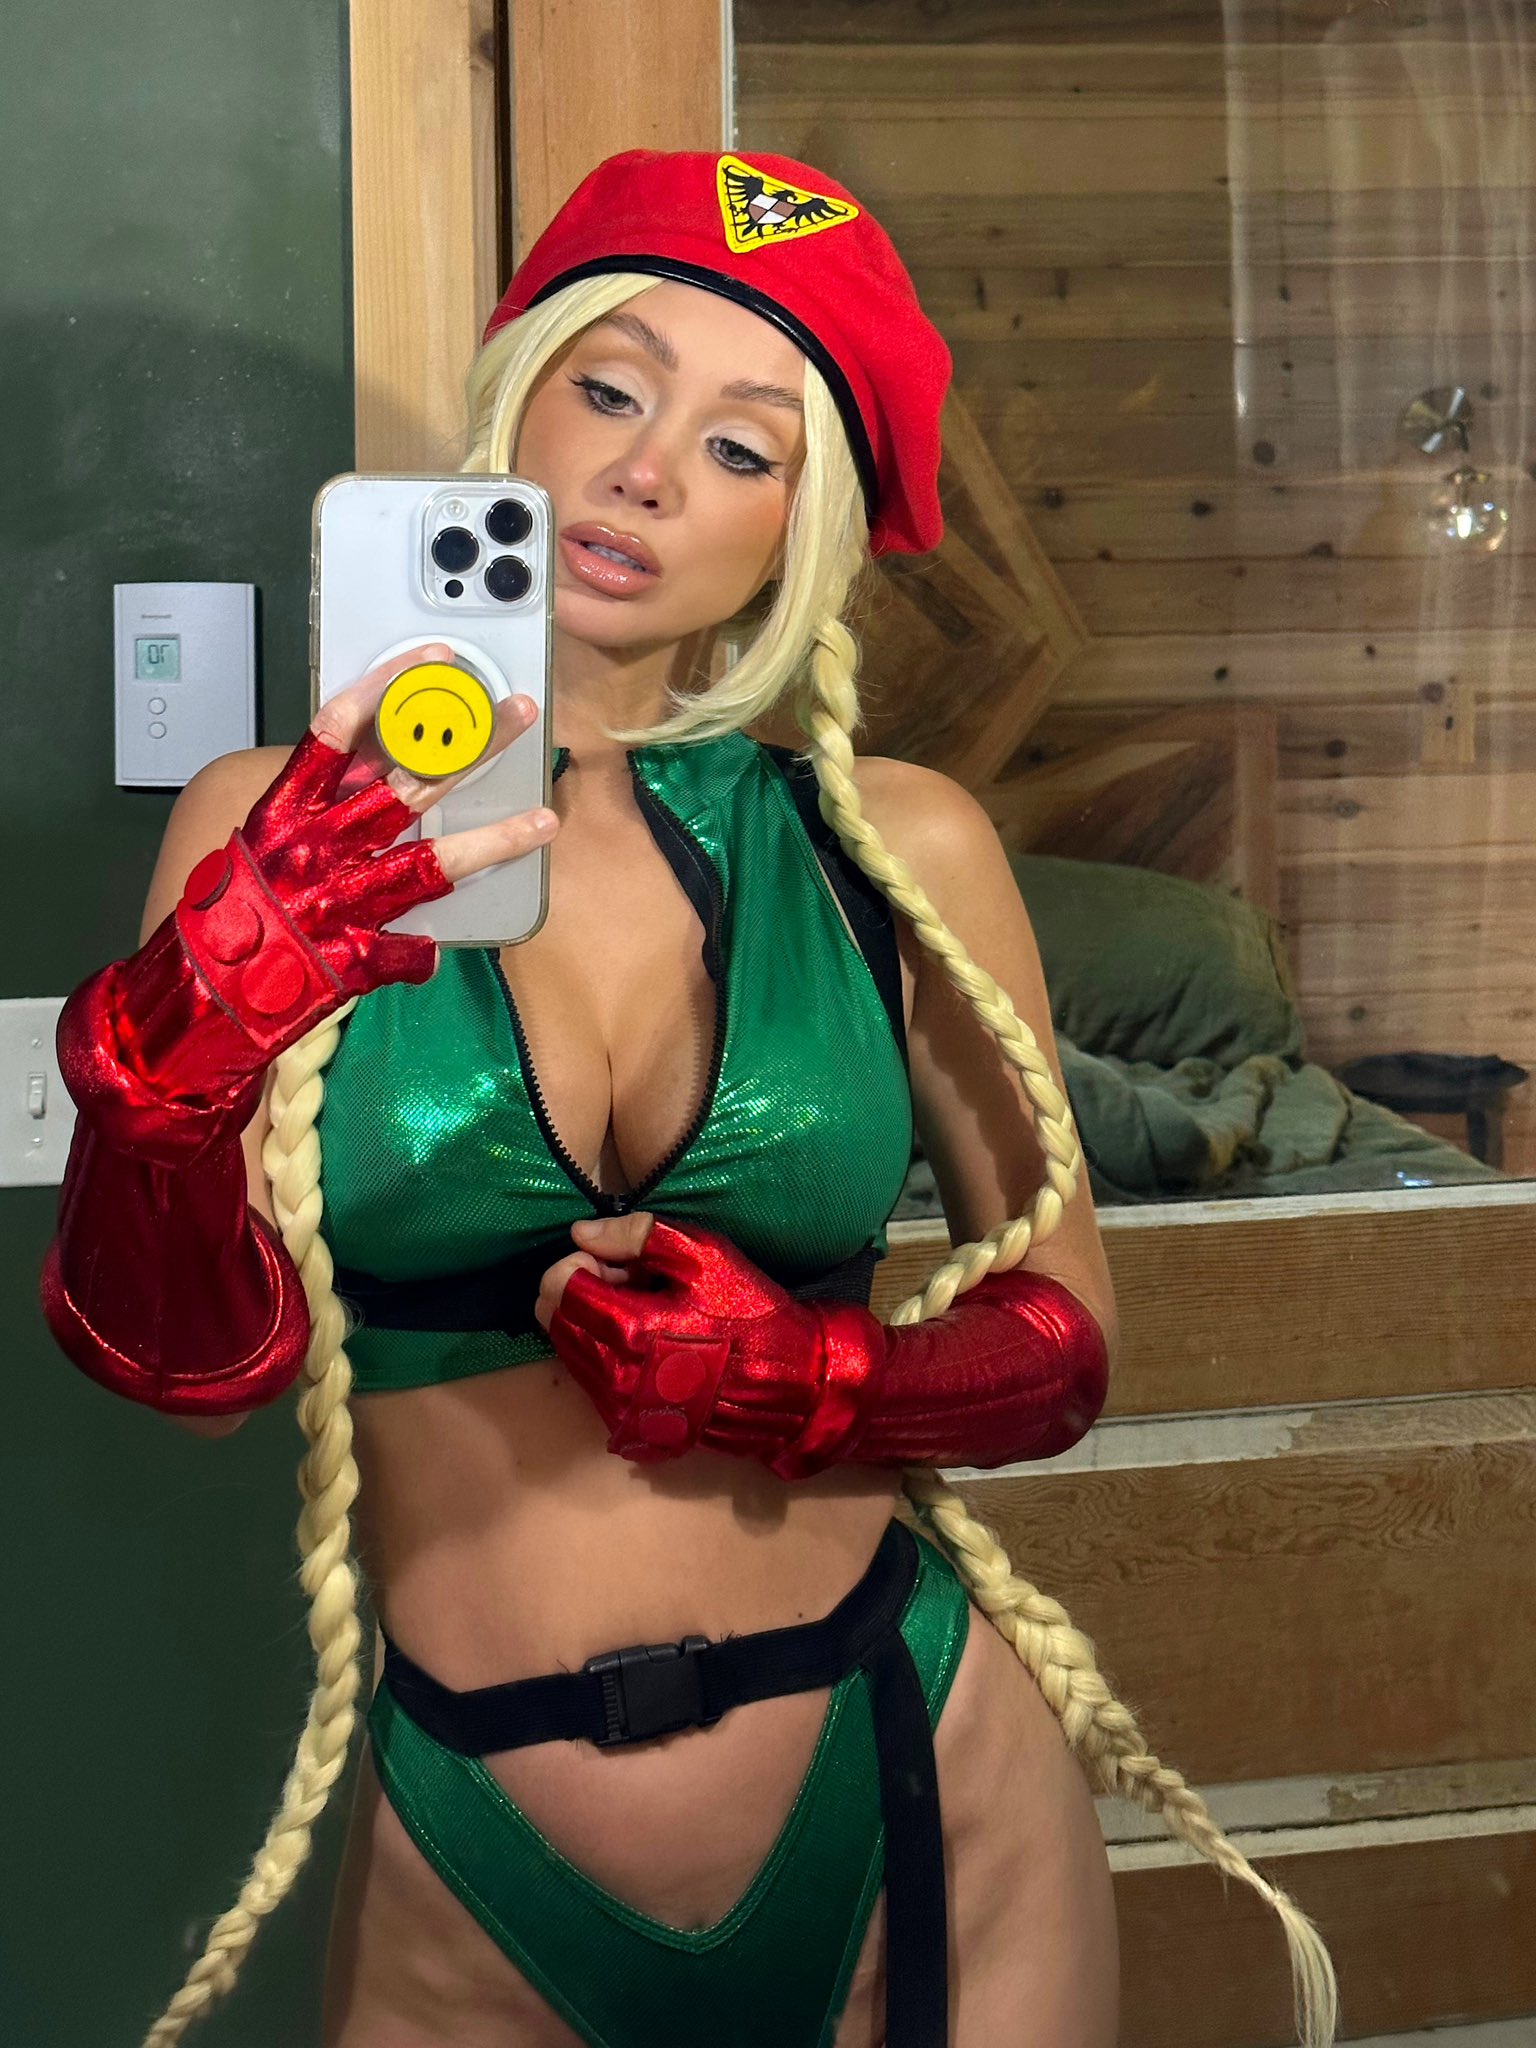 Sara Jean Underwood on X: Like my costume this year? You know where to go  for more 🤫🤭 t.coABJ4qnGXaU  X